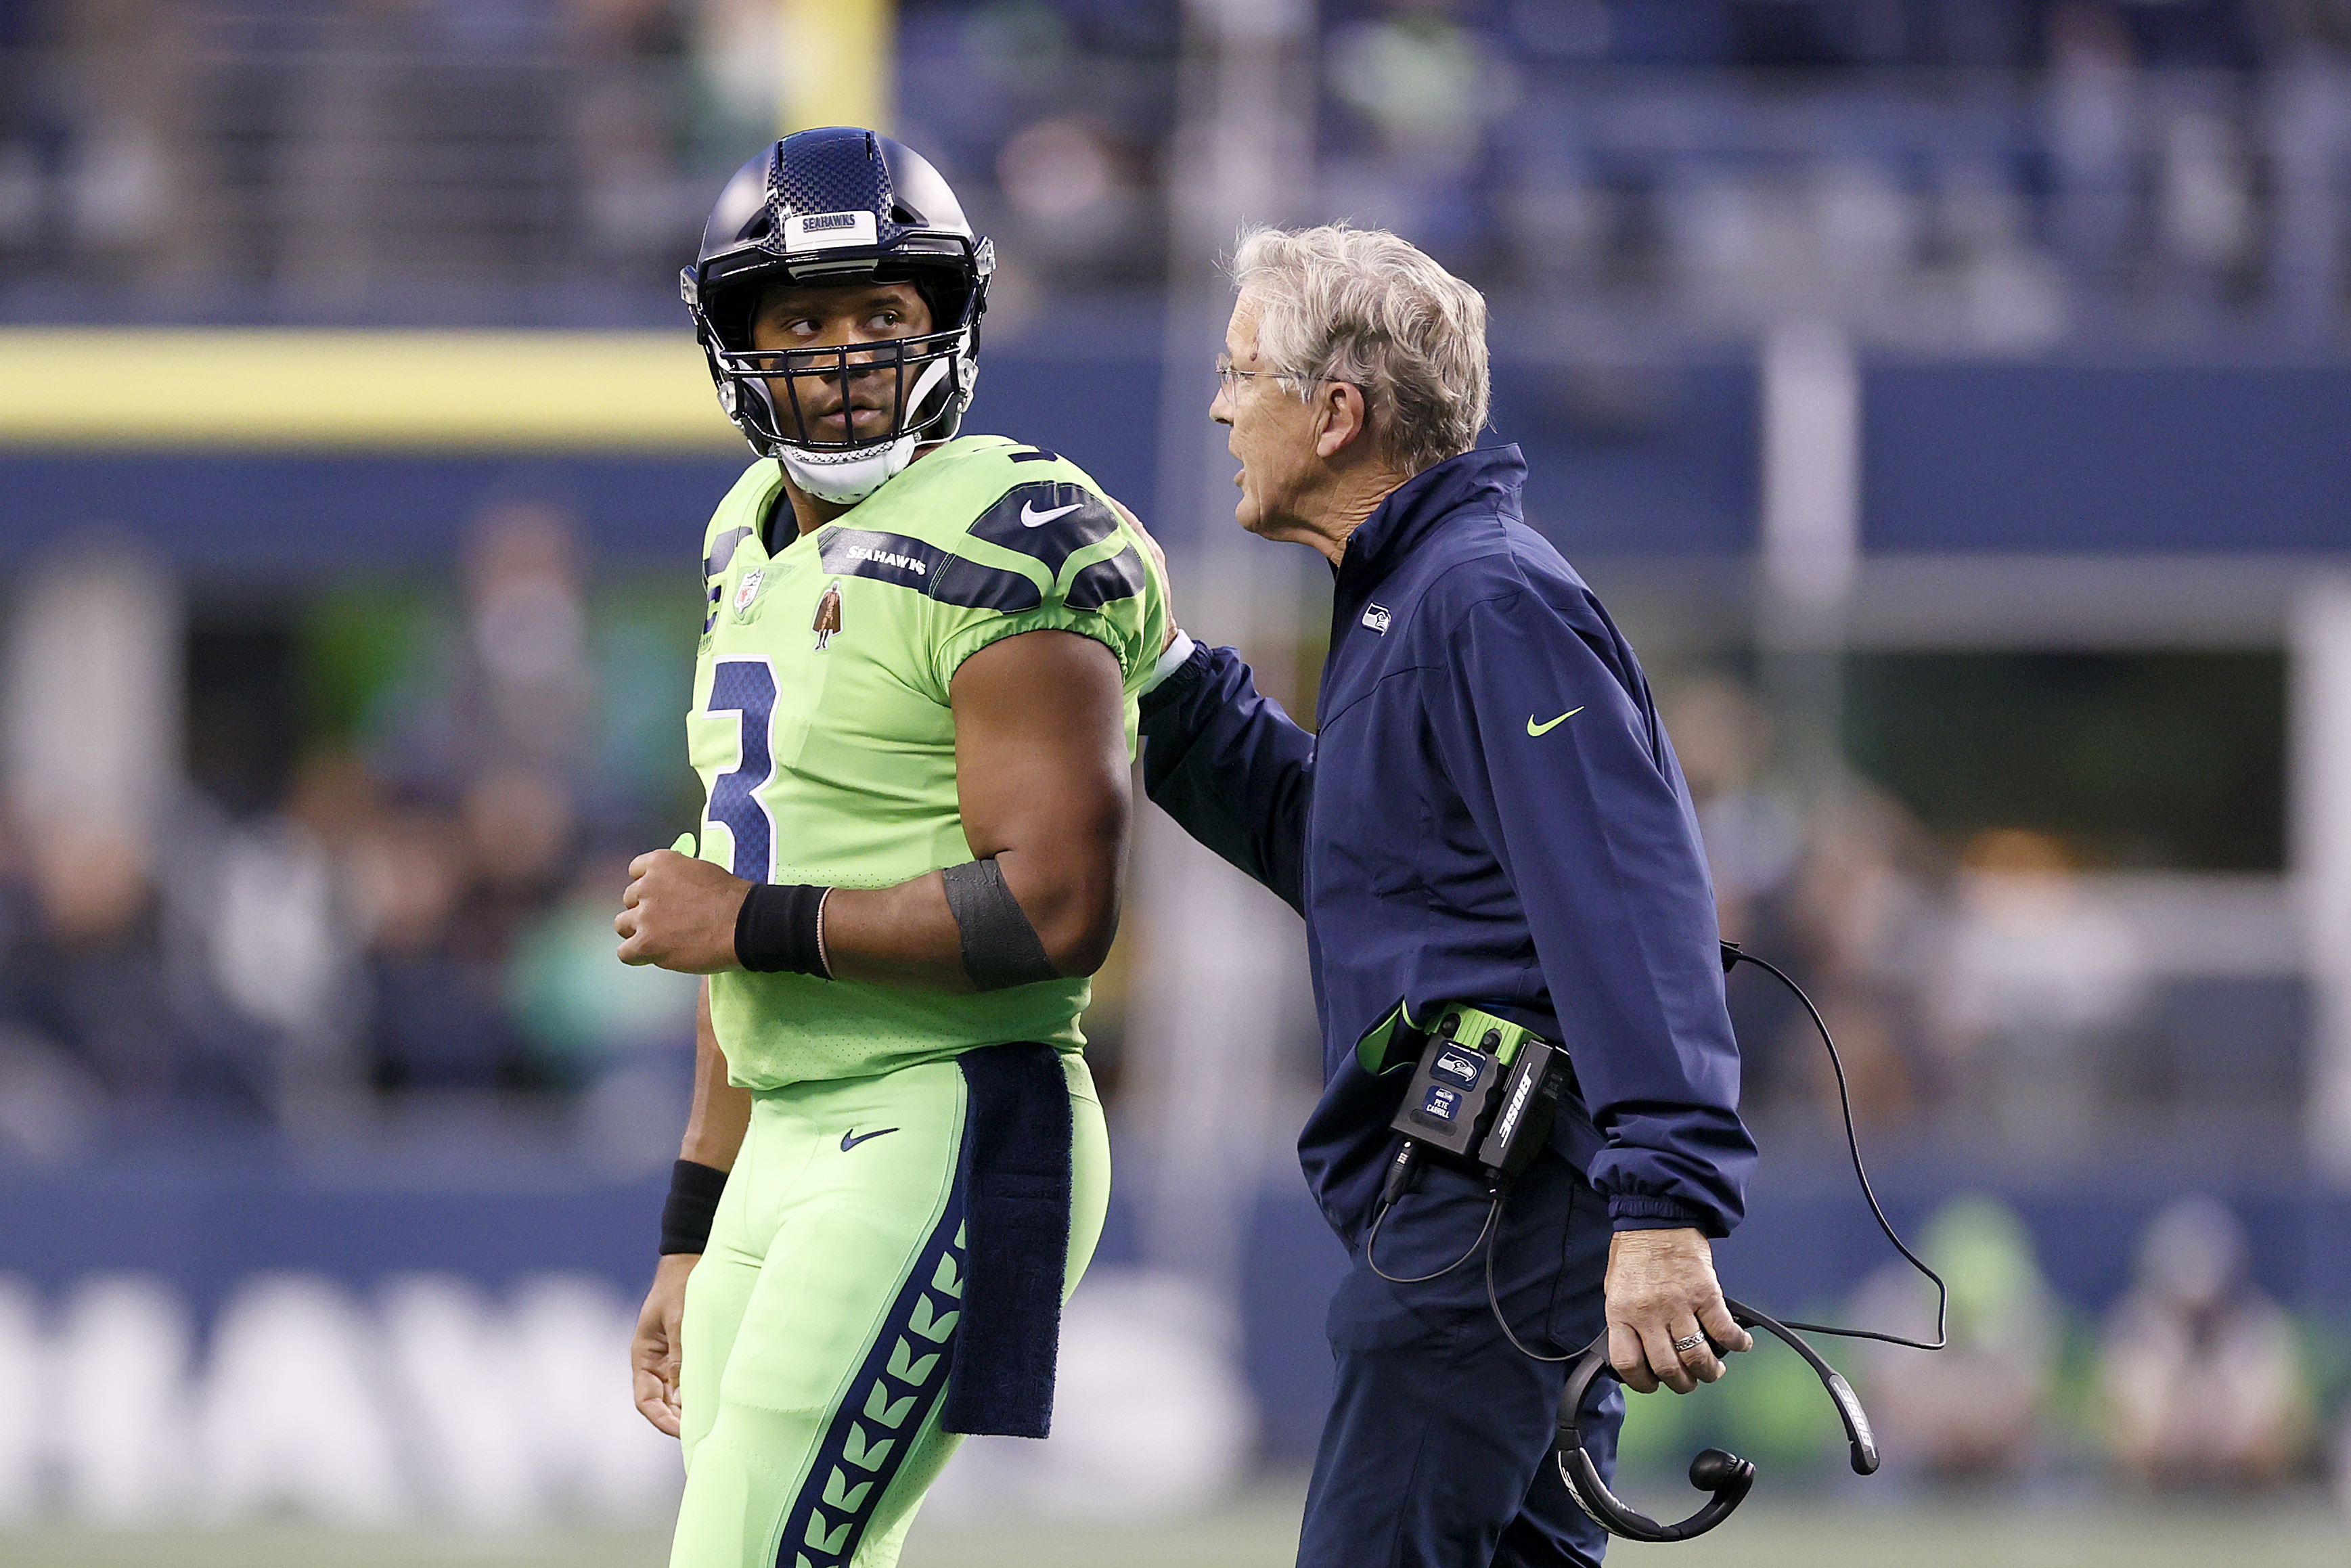 Seahawks head coach Pete Carroll talks to Russell Wilson during a game